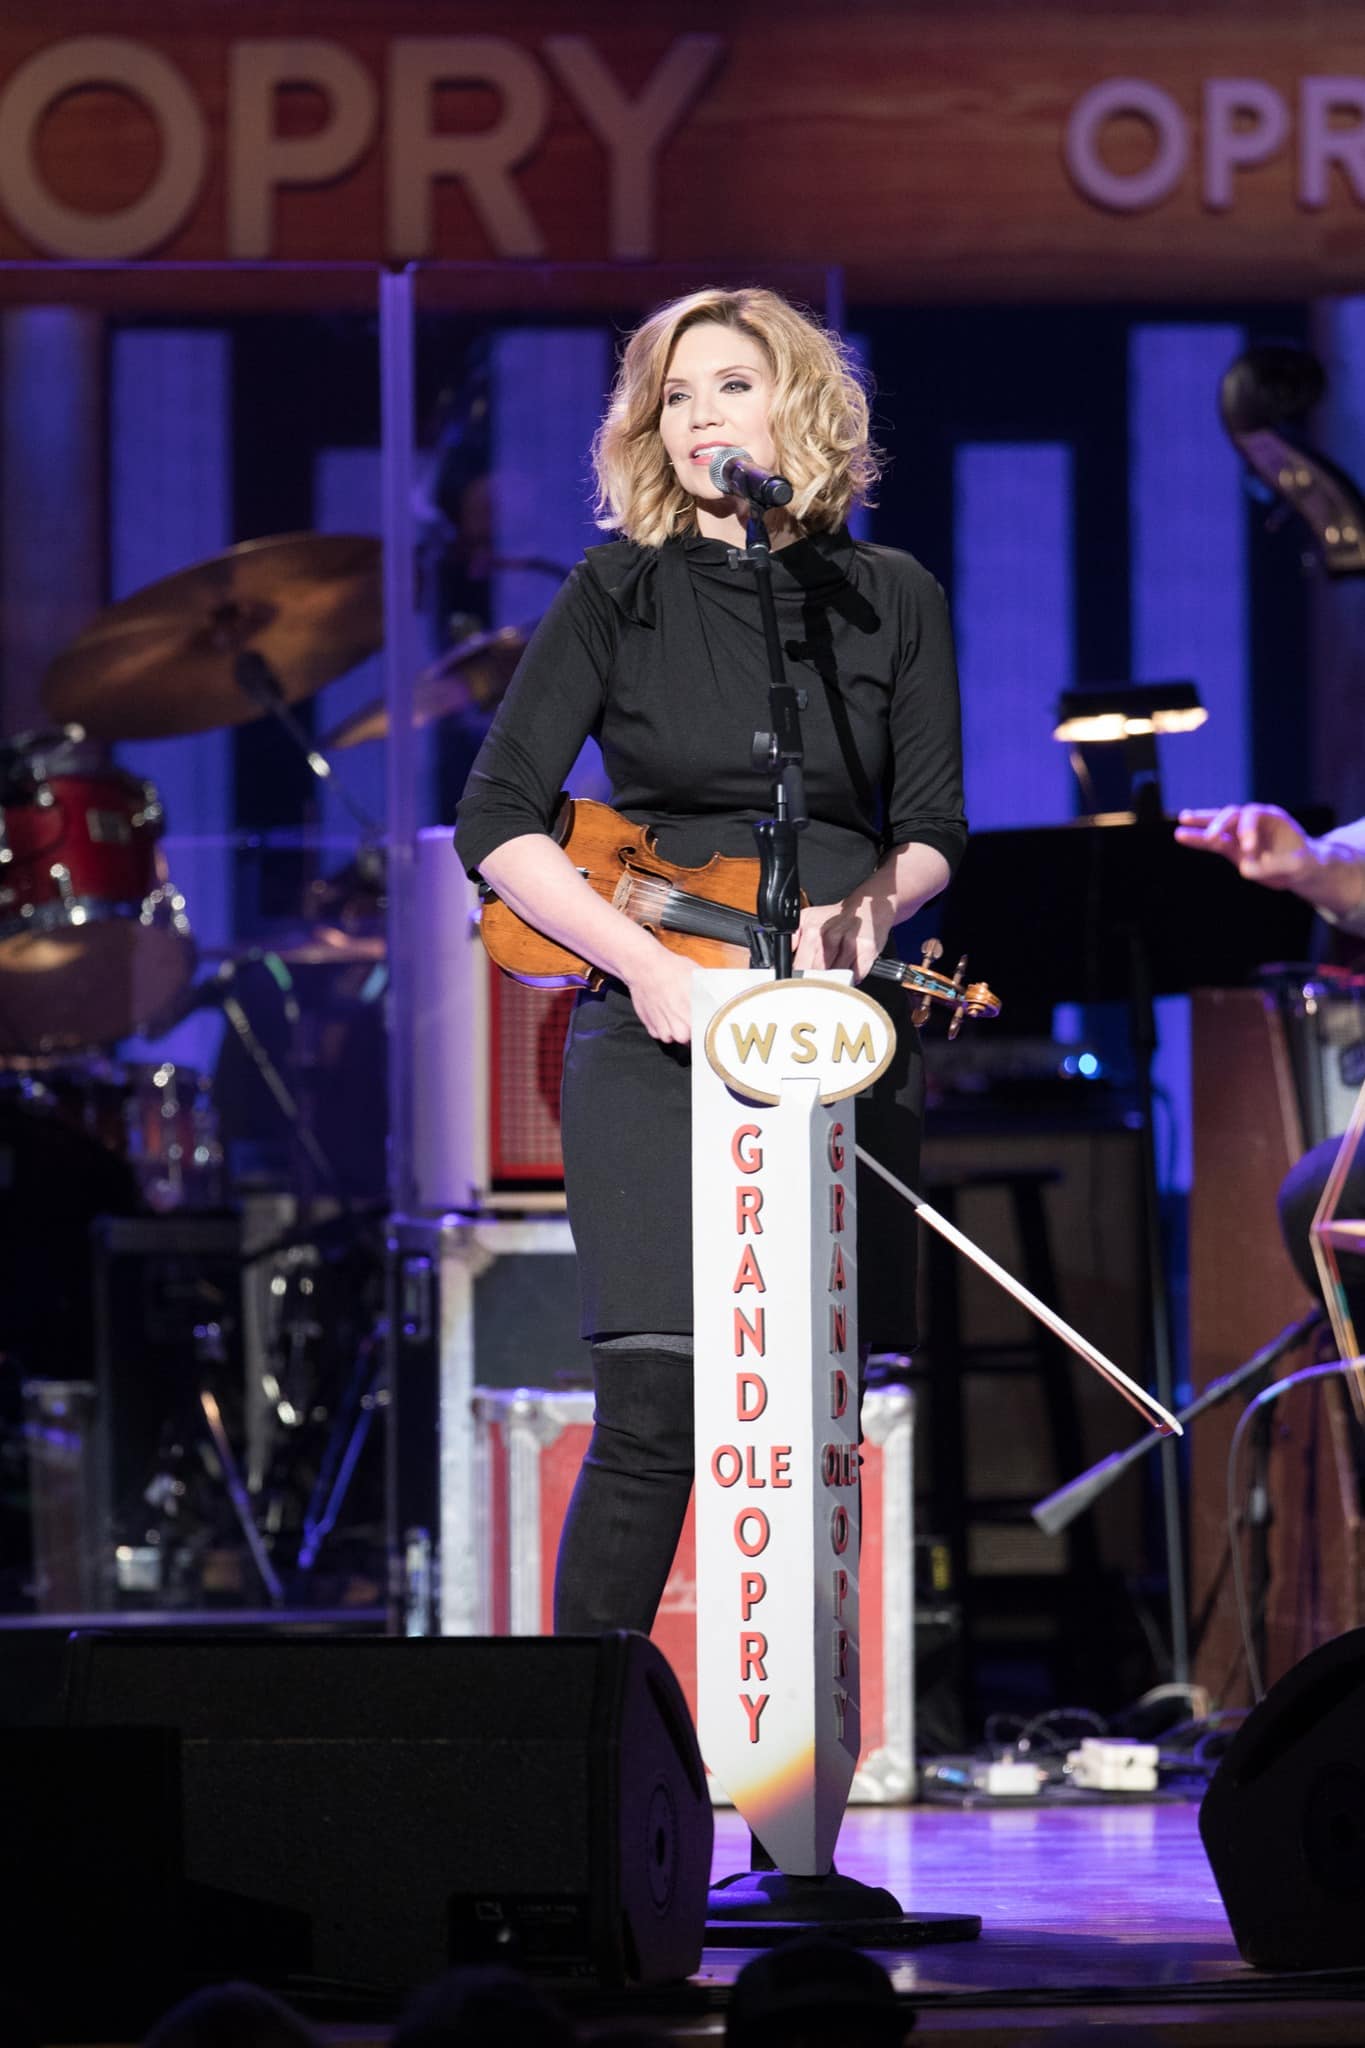 Fun Facts About Alison Krauss - She Was Once The Youngest Member Of The Opry